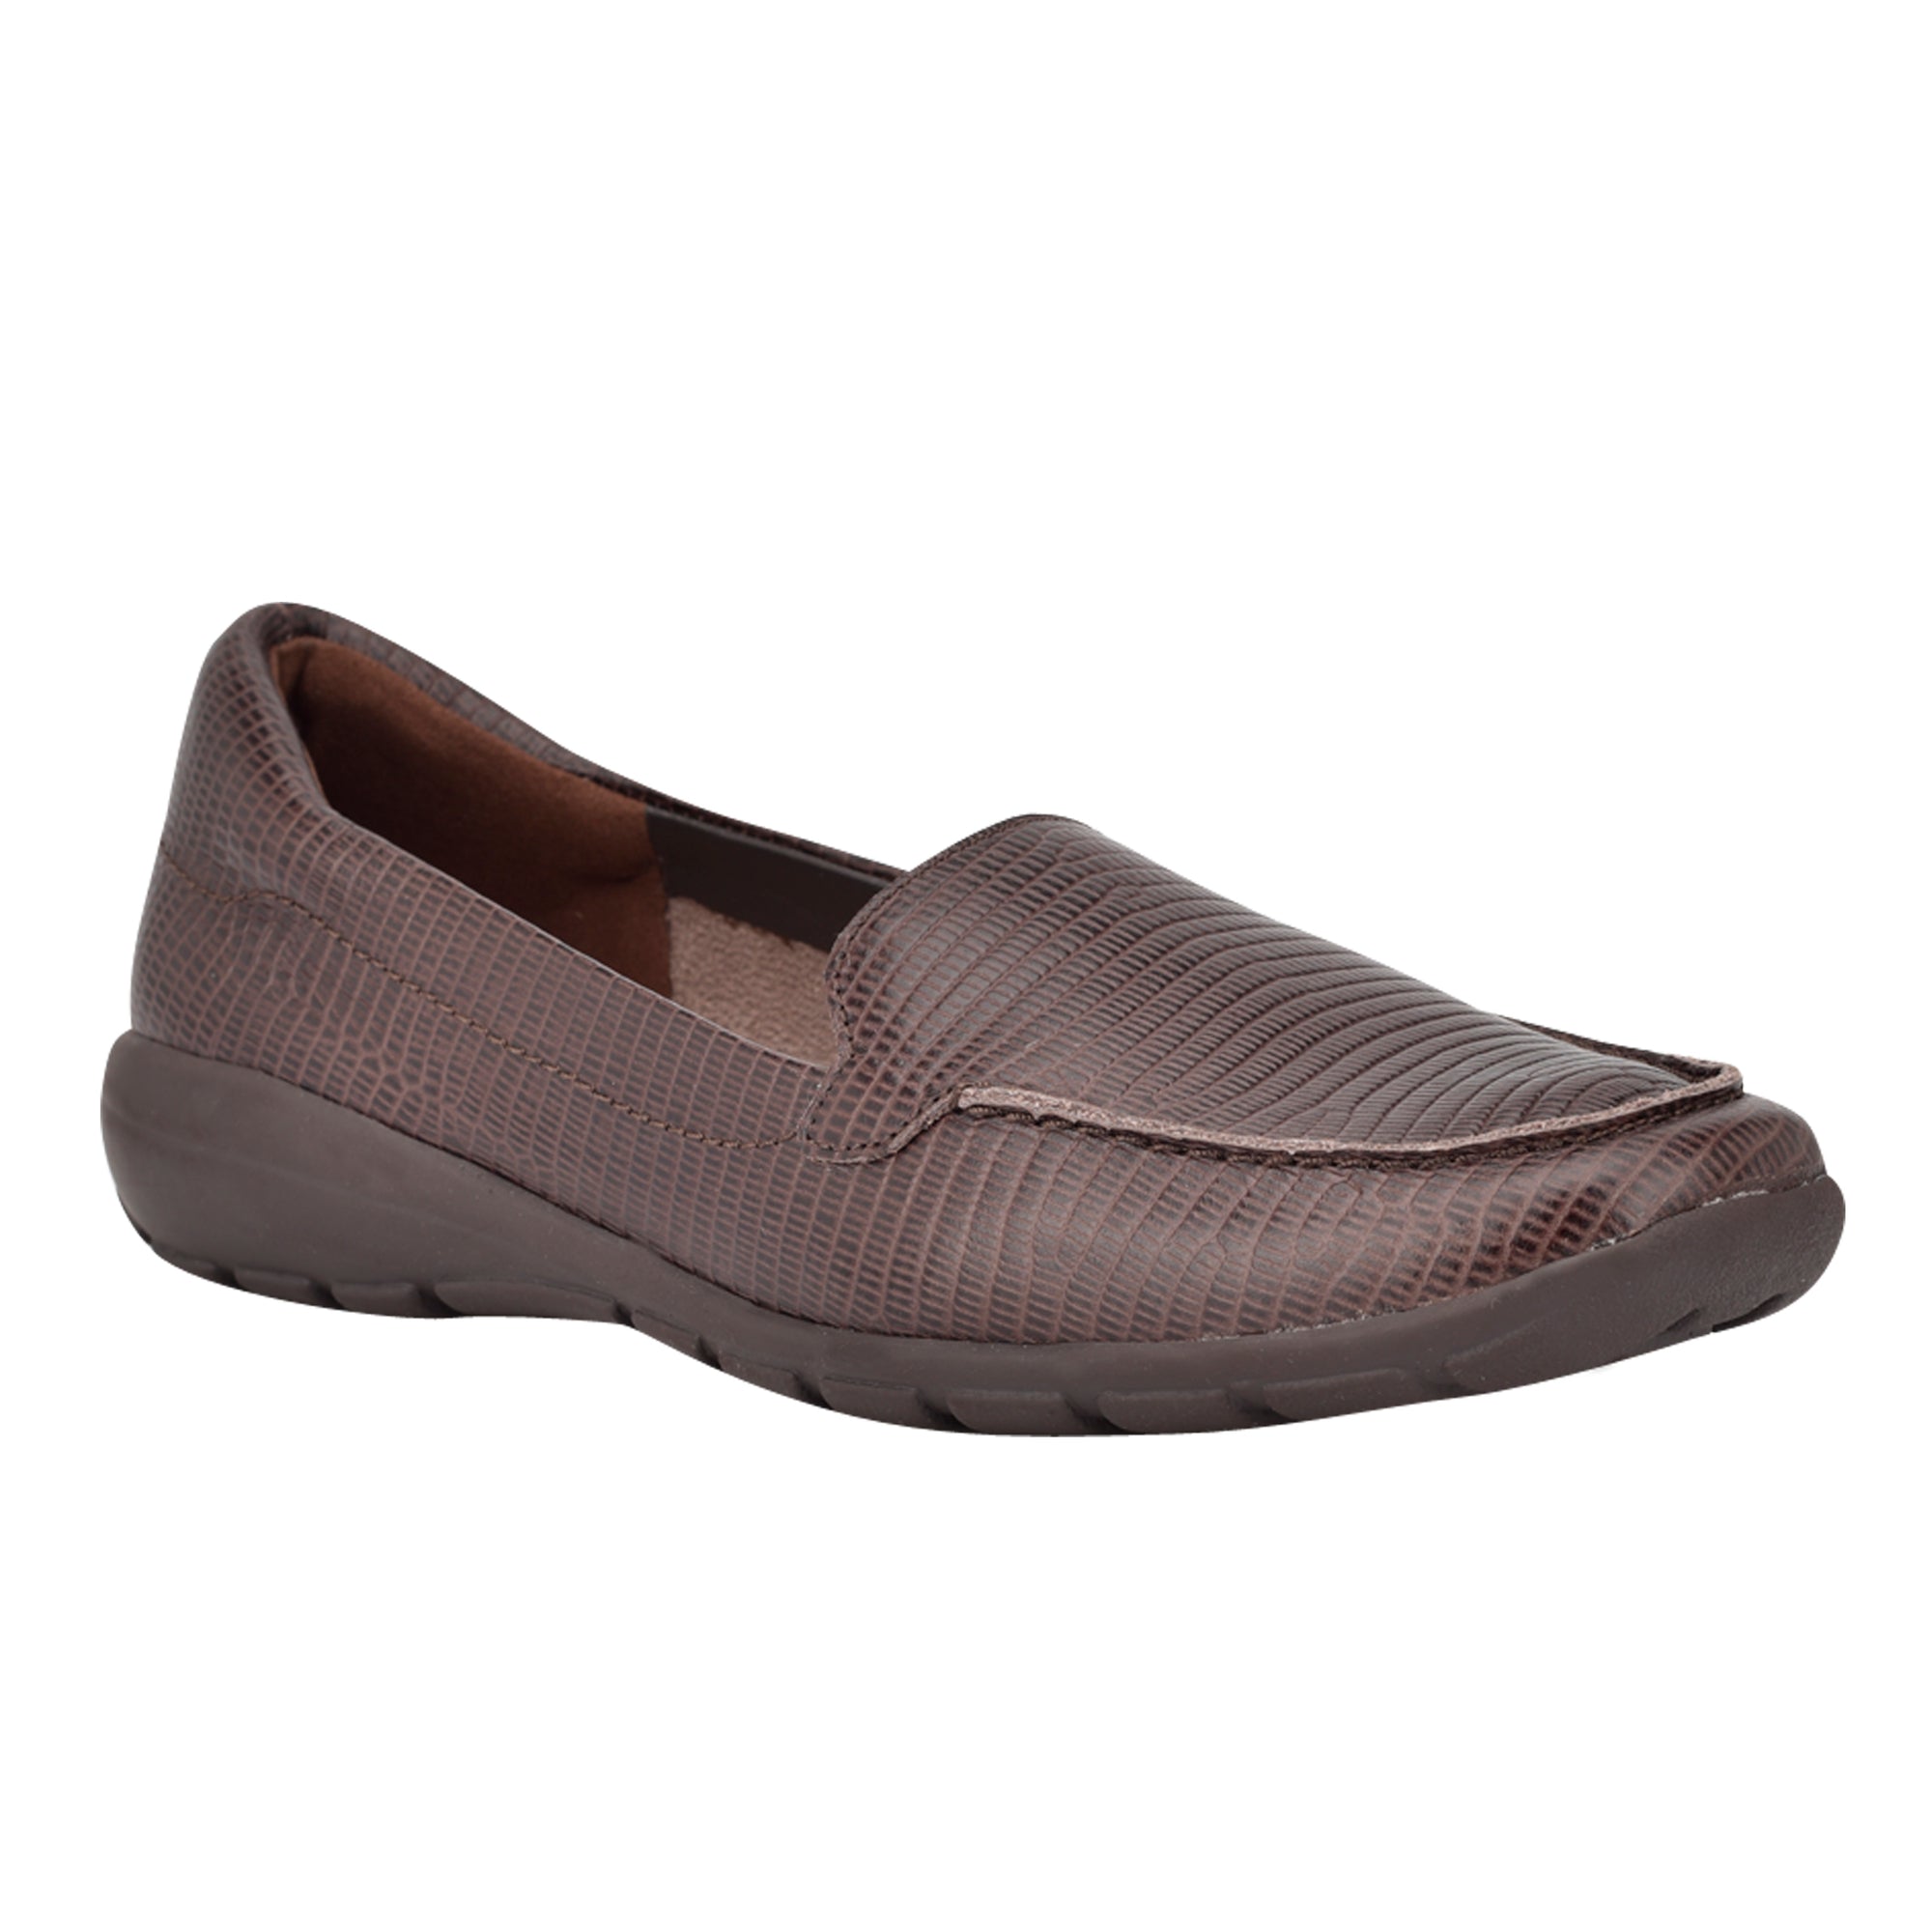 Abide Leather Casual Flats - Easy Spirit